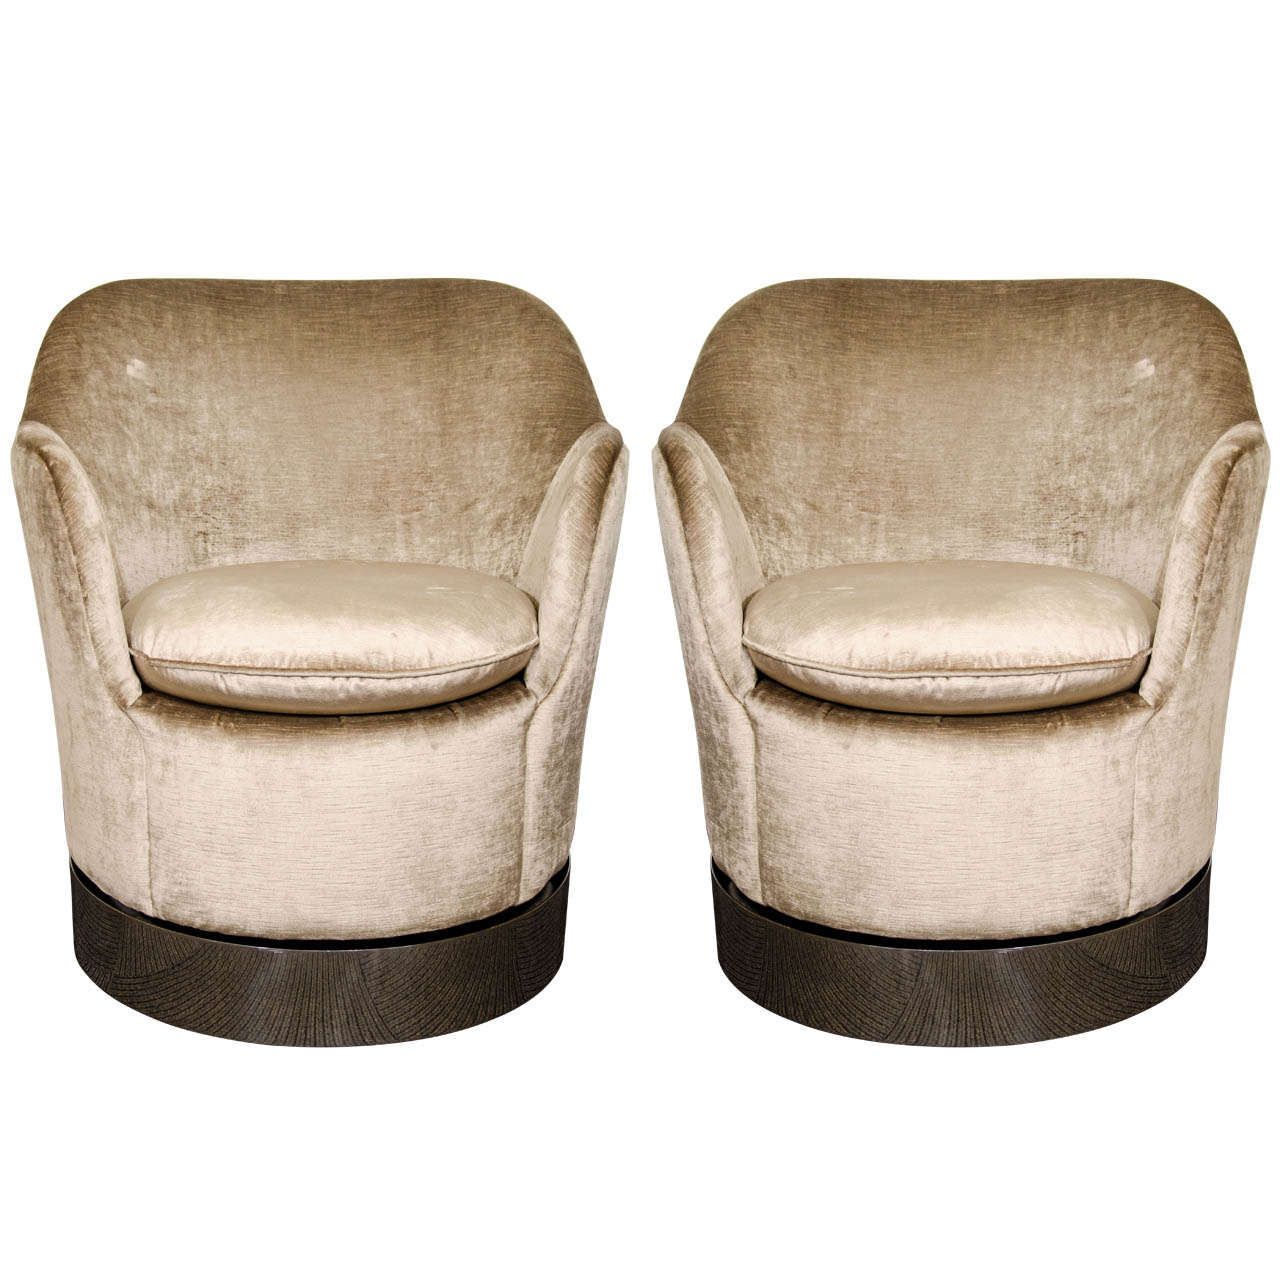 A Mid Century Pair of Philip Enfield Chairs